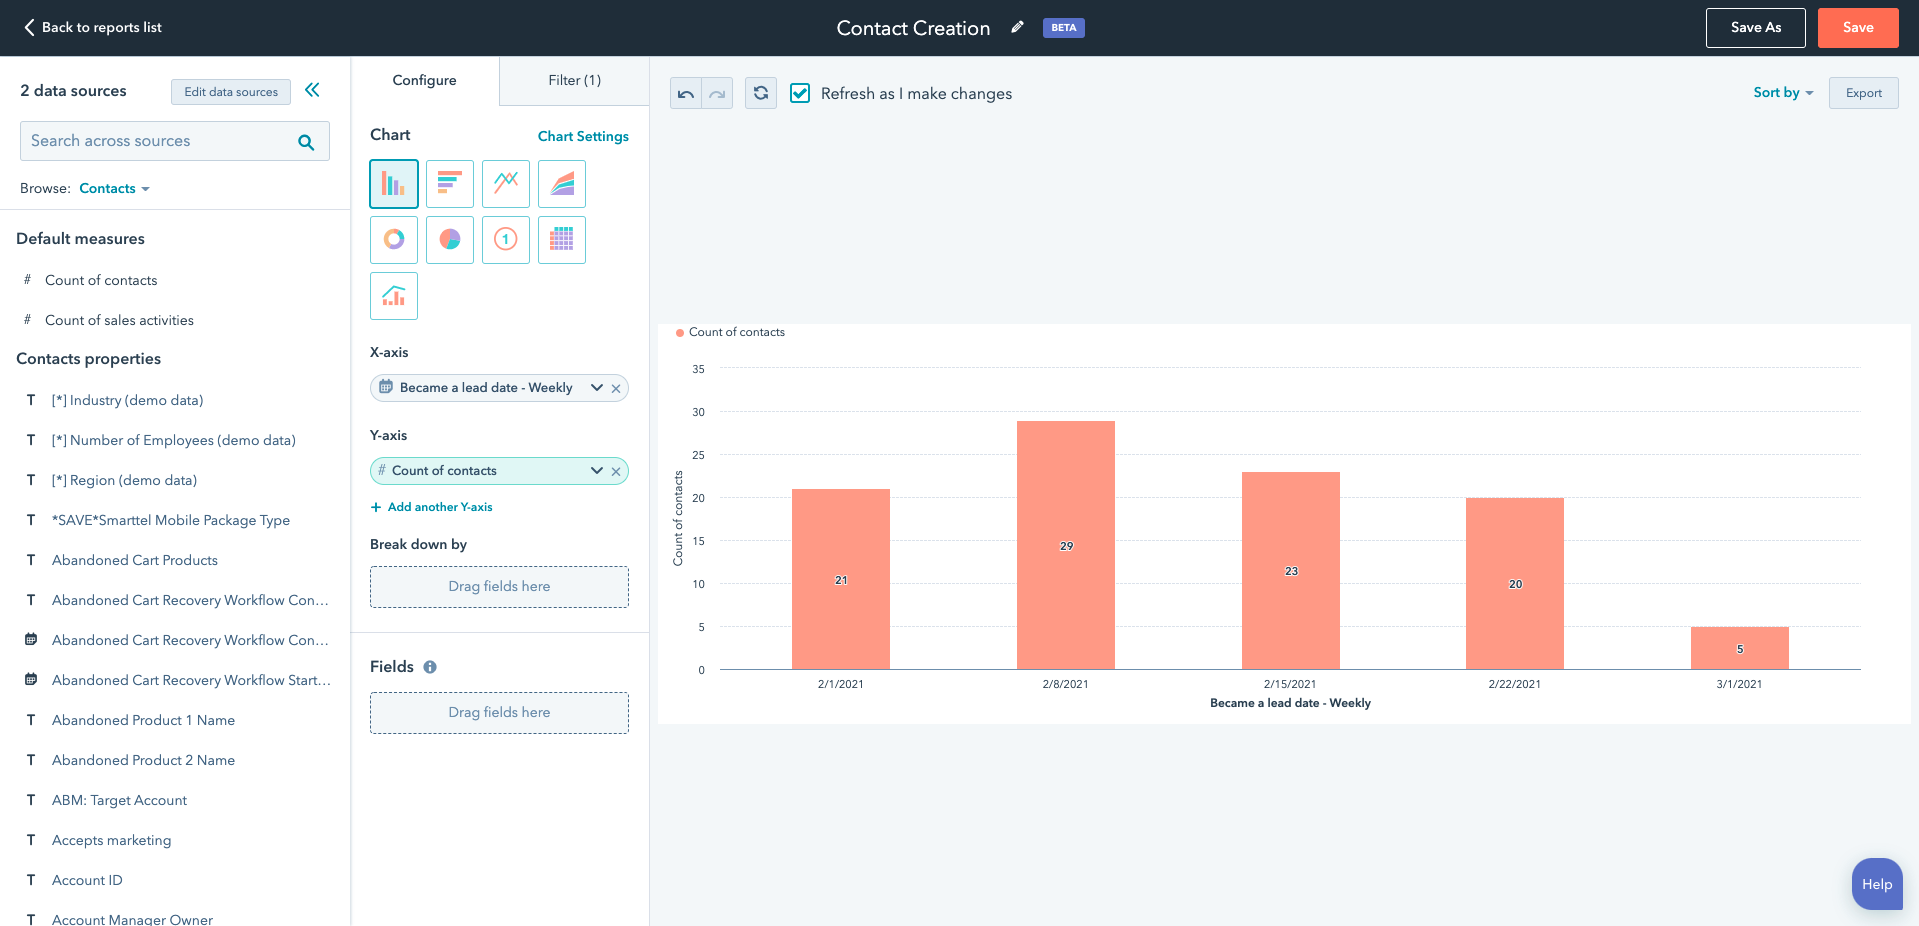 HubSpot sales reporting software showing custom reports builder interface